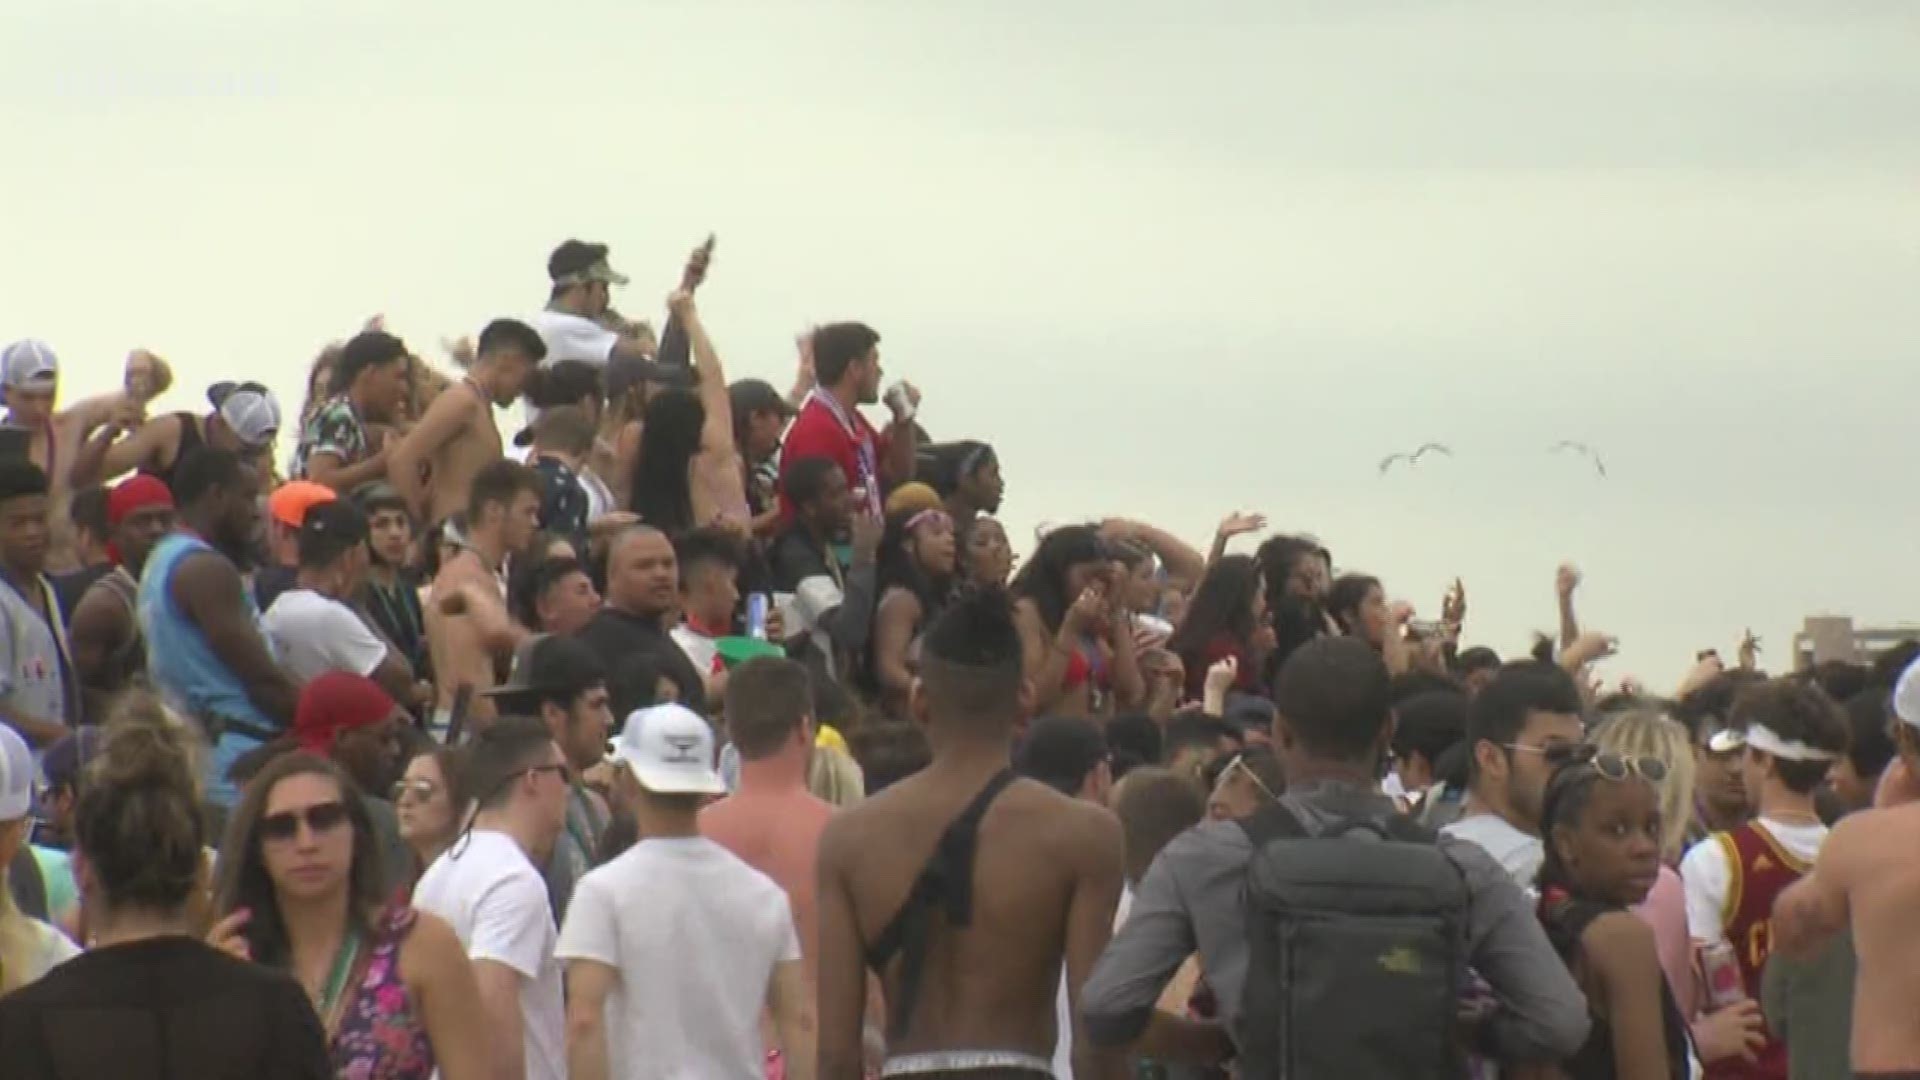 Last weekend marked what locals call the crossover weekend as Spring Break continues for some students, and according to new numbers released from the Port Aransas Police Department, it's been a busy one.